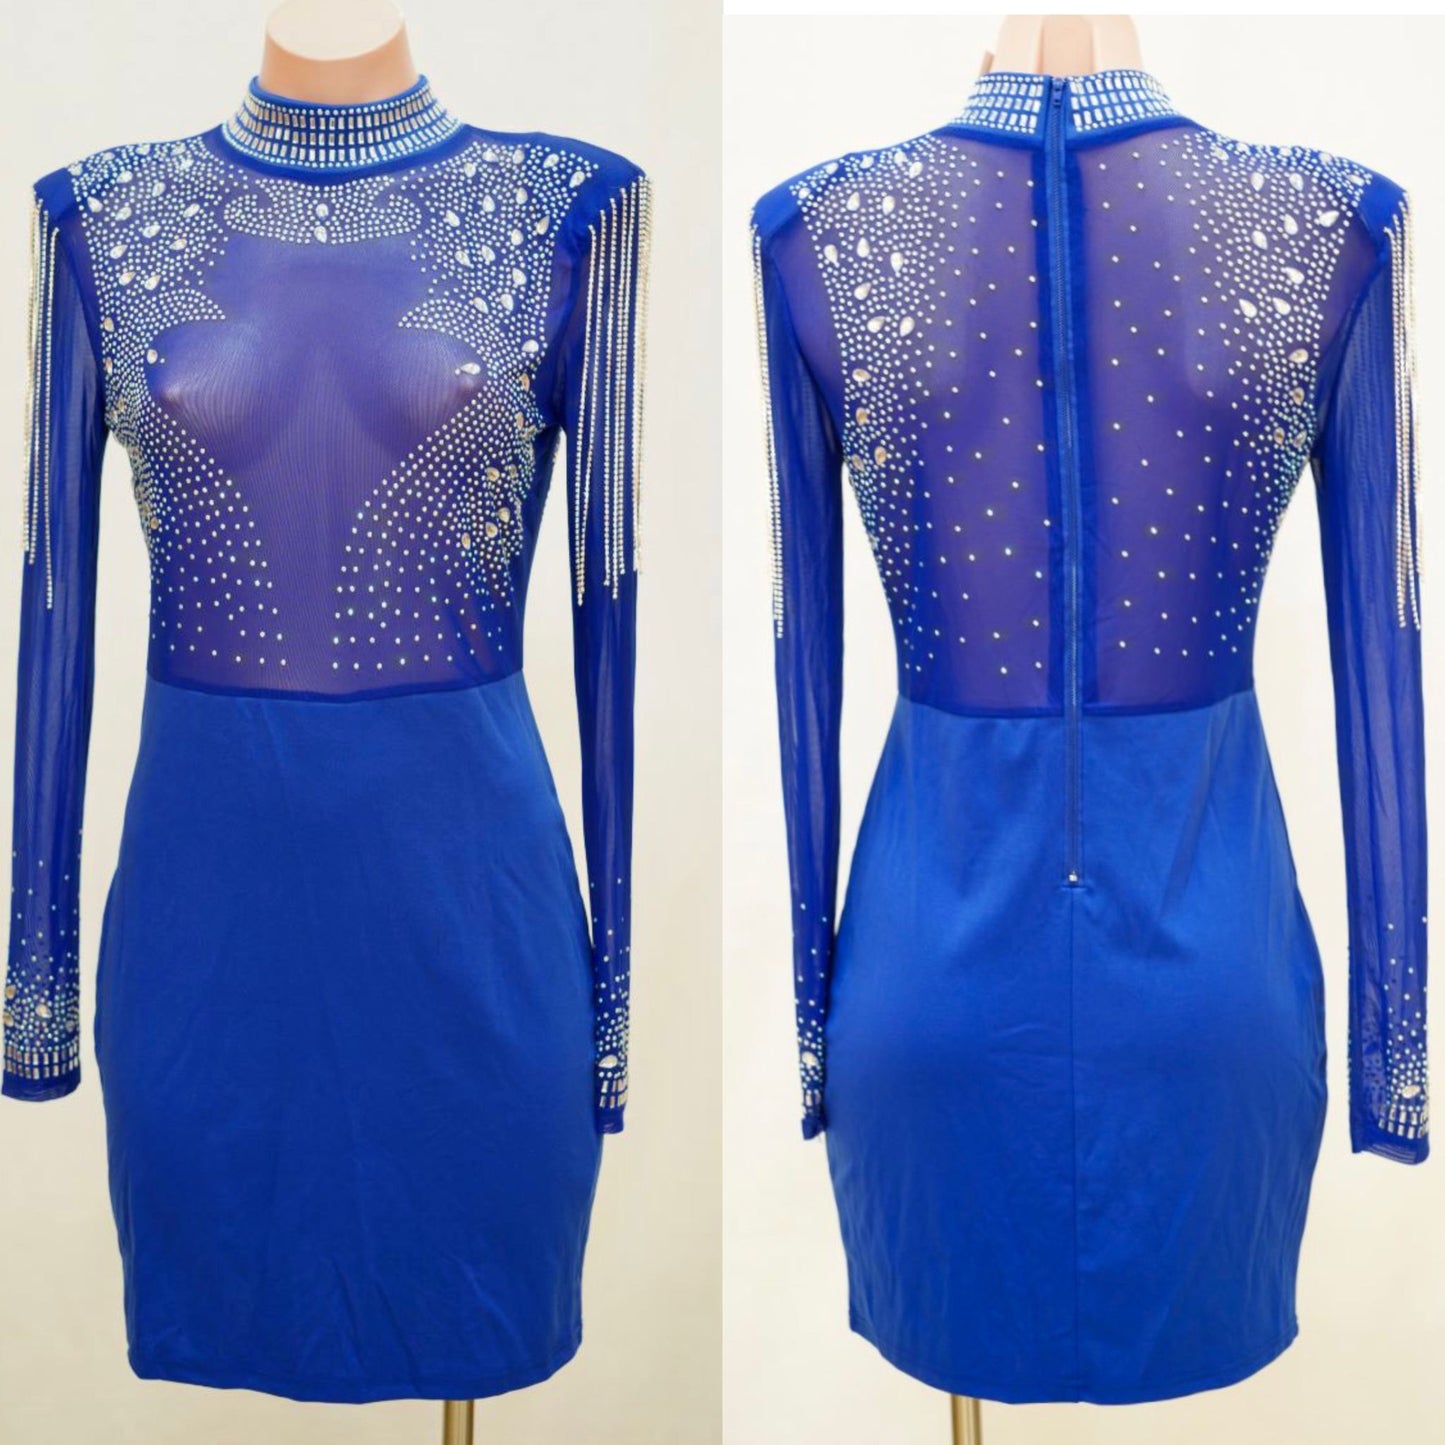 The Perfect Royal Blue Diamond Studded Party Dress